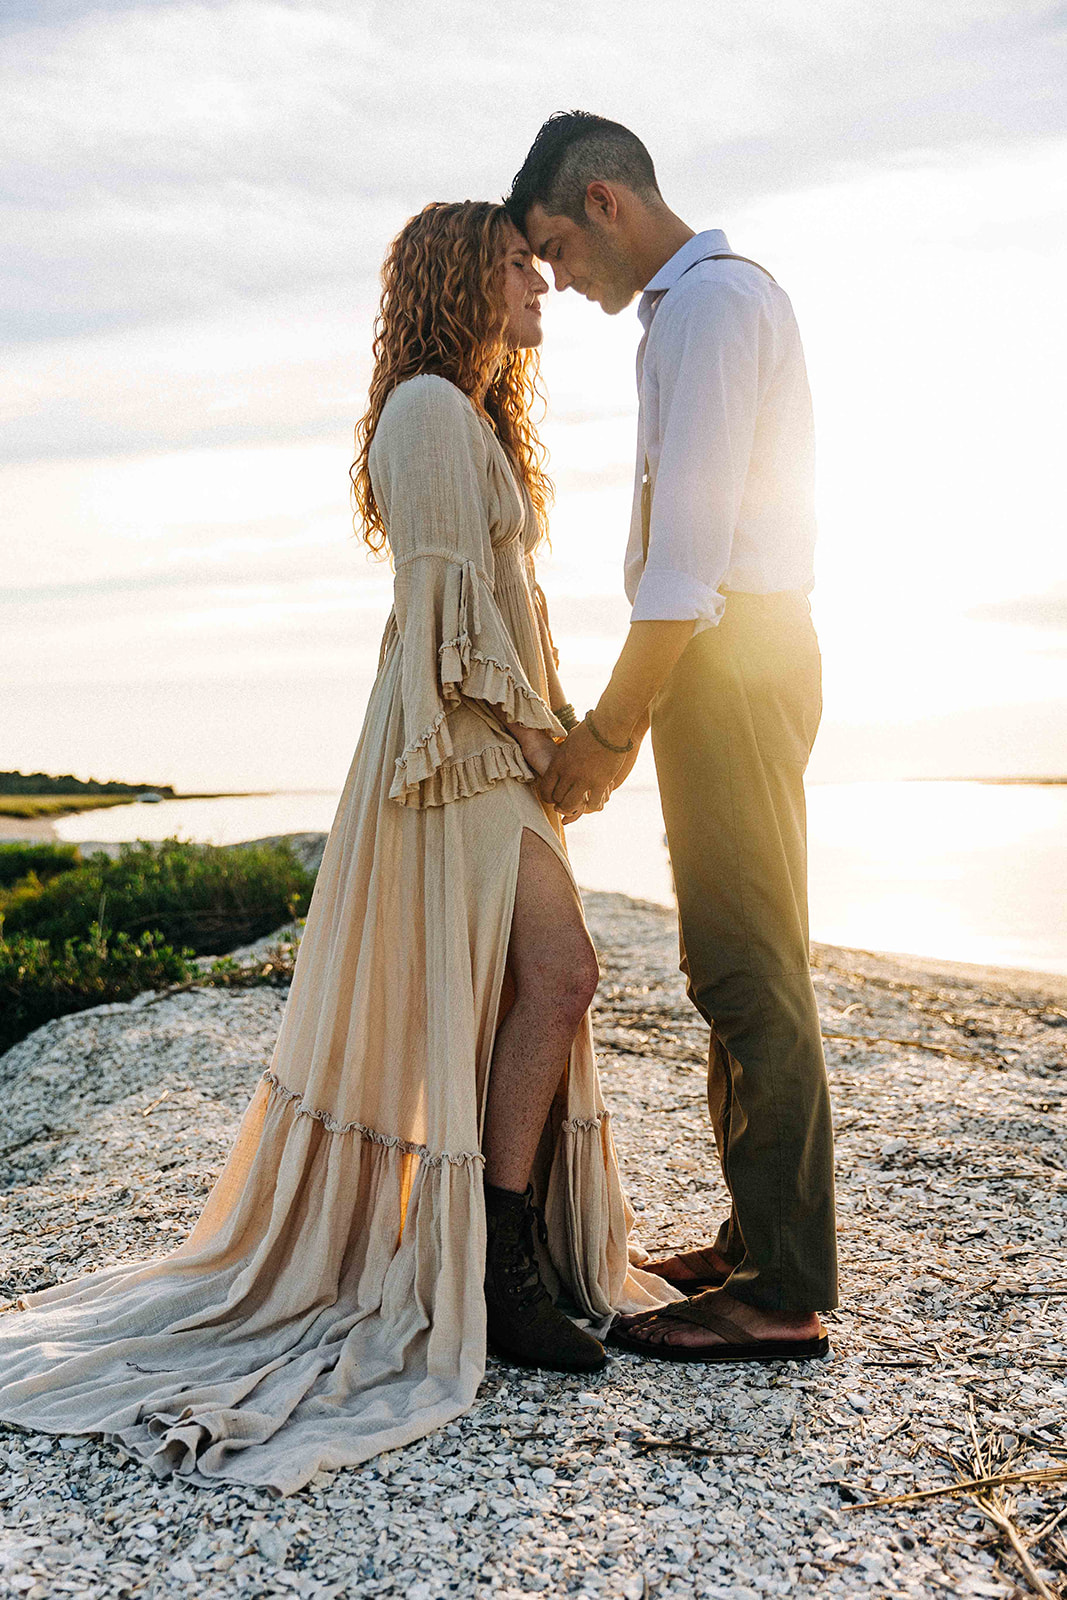 A couple in wedding attire walks on a beach at sunset, with the bride holding her gown and both smiling. Floral arrangements are scattered on the sand behind them at their georgia elopement location